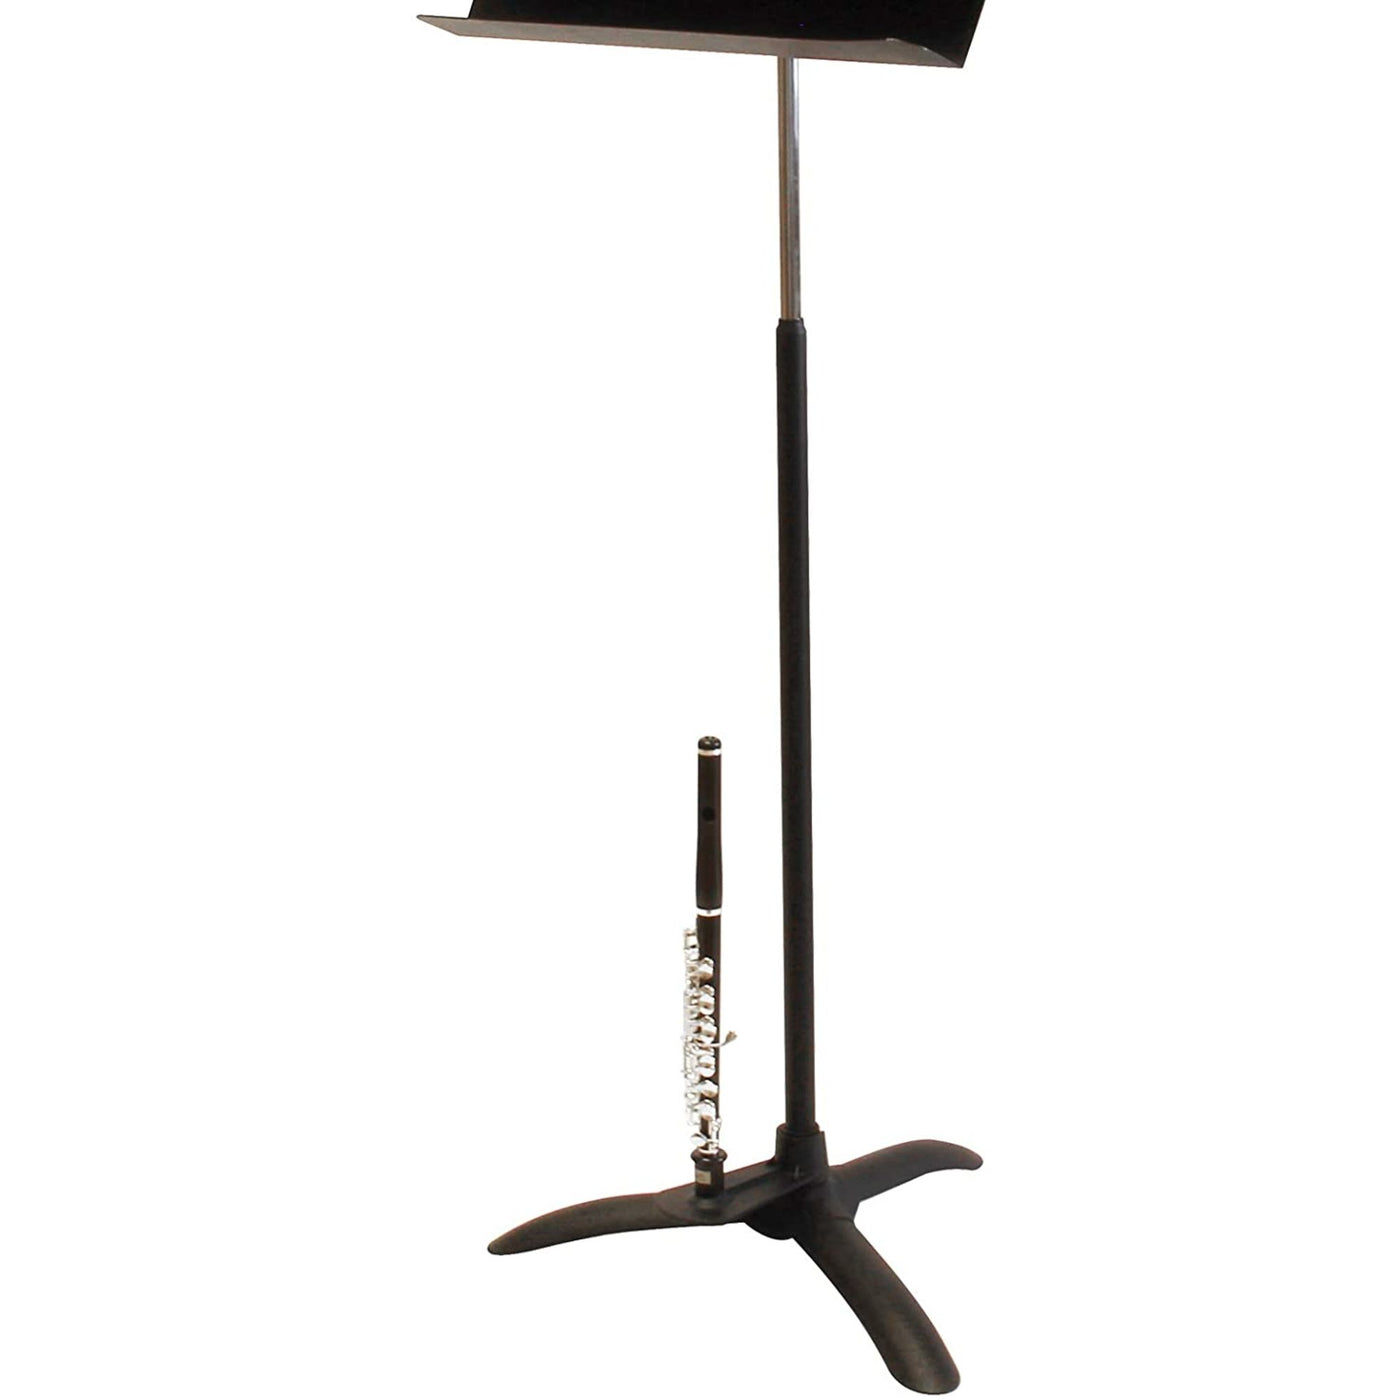 Manhasset Piccolo Peg for Music Stand Adapter, Black (1430)